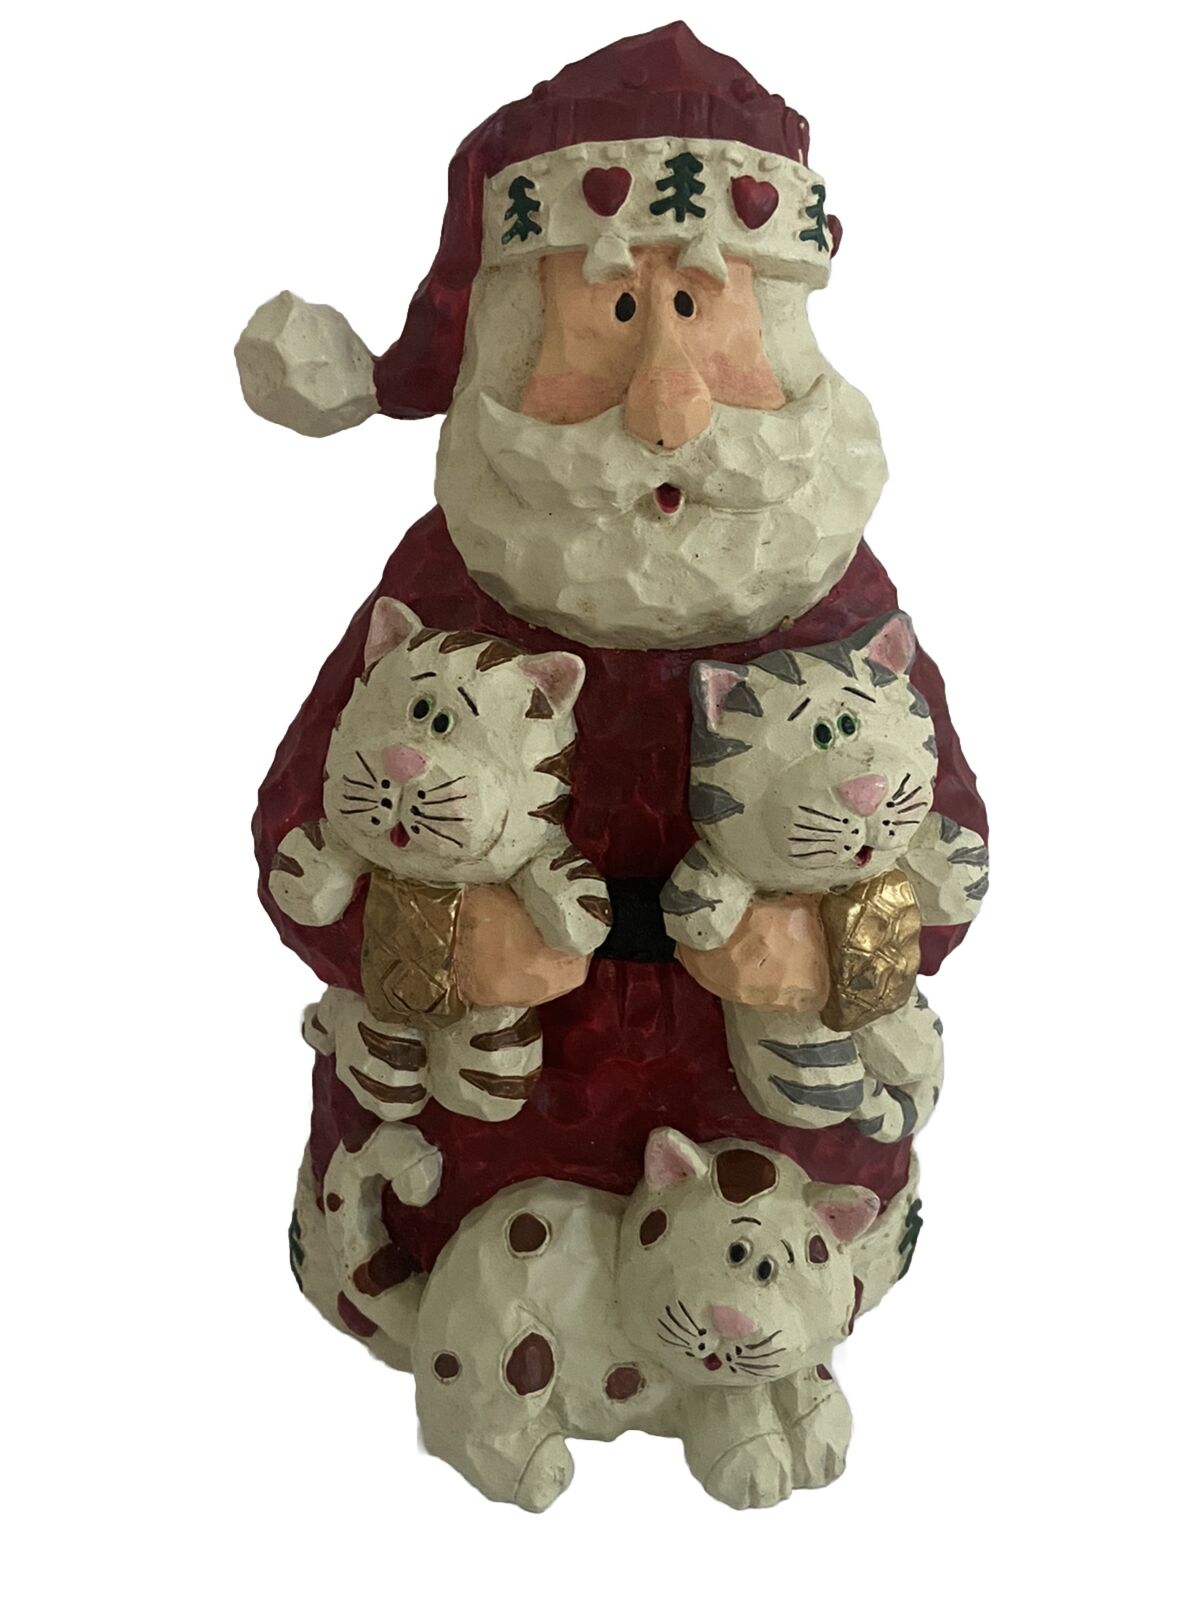 Santa Claus Holding CATS carved resin Figurine Vintage Christmas Decor 7 in